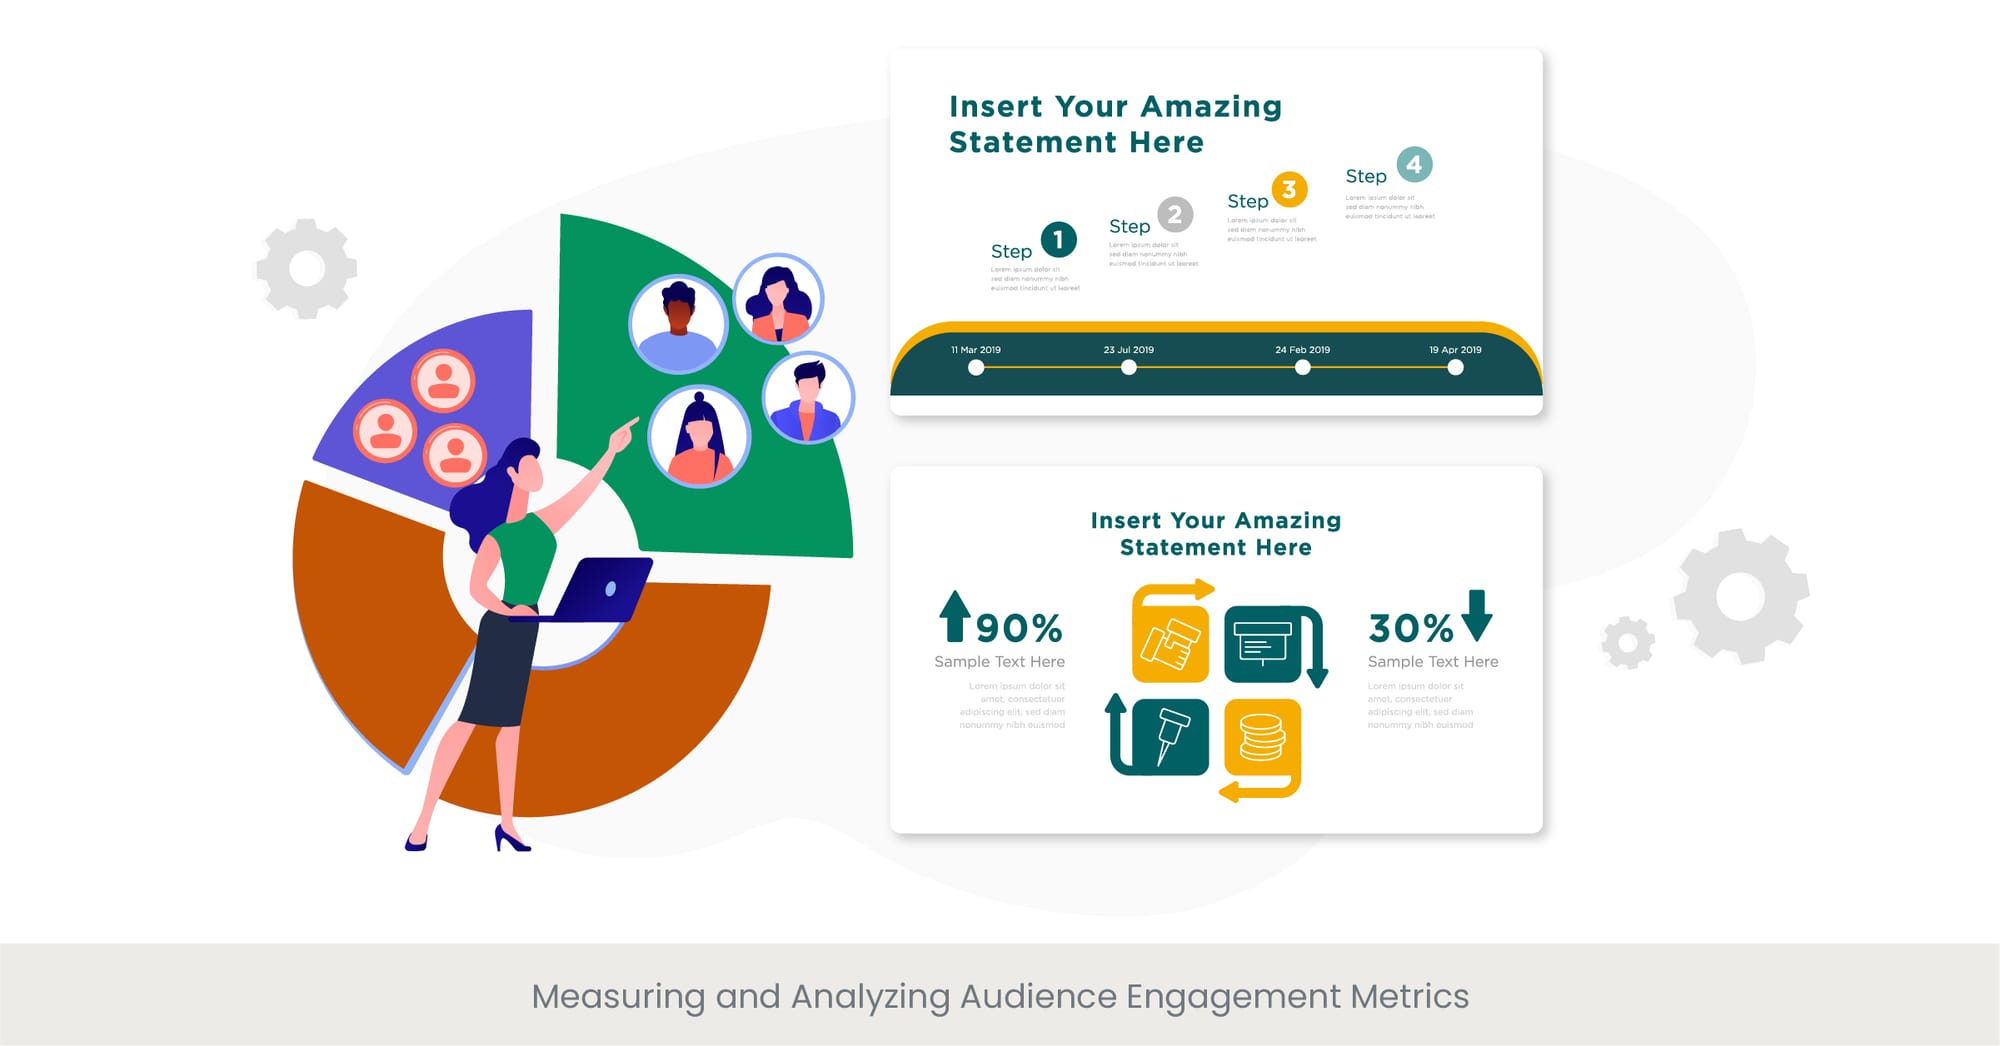 Measuring and Analyzing Audience Engagement Metrics